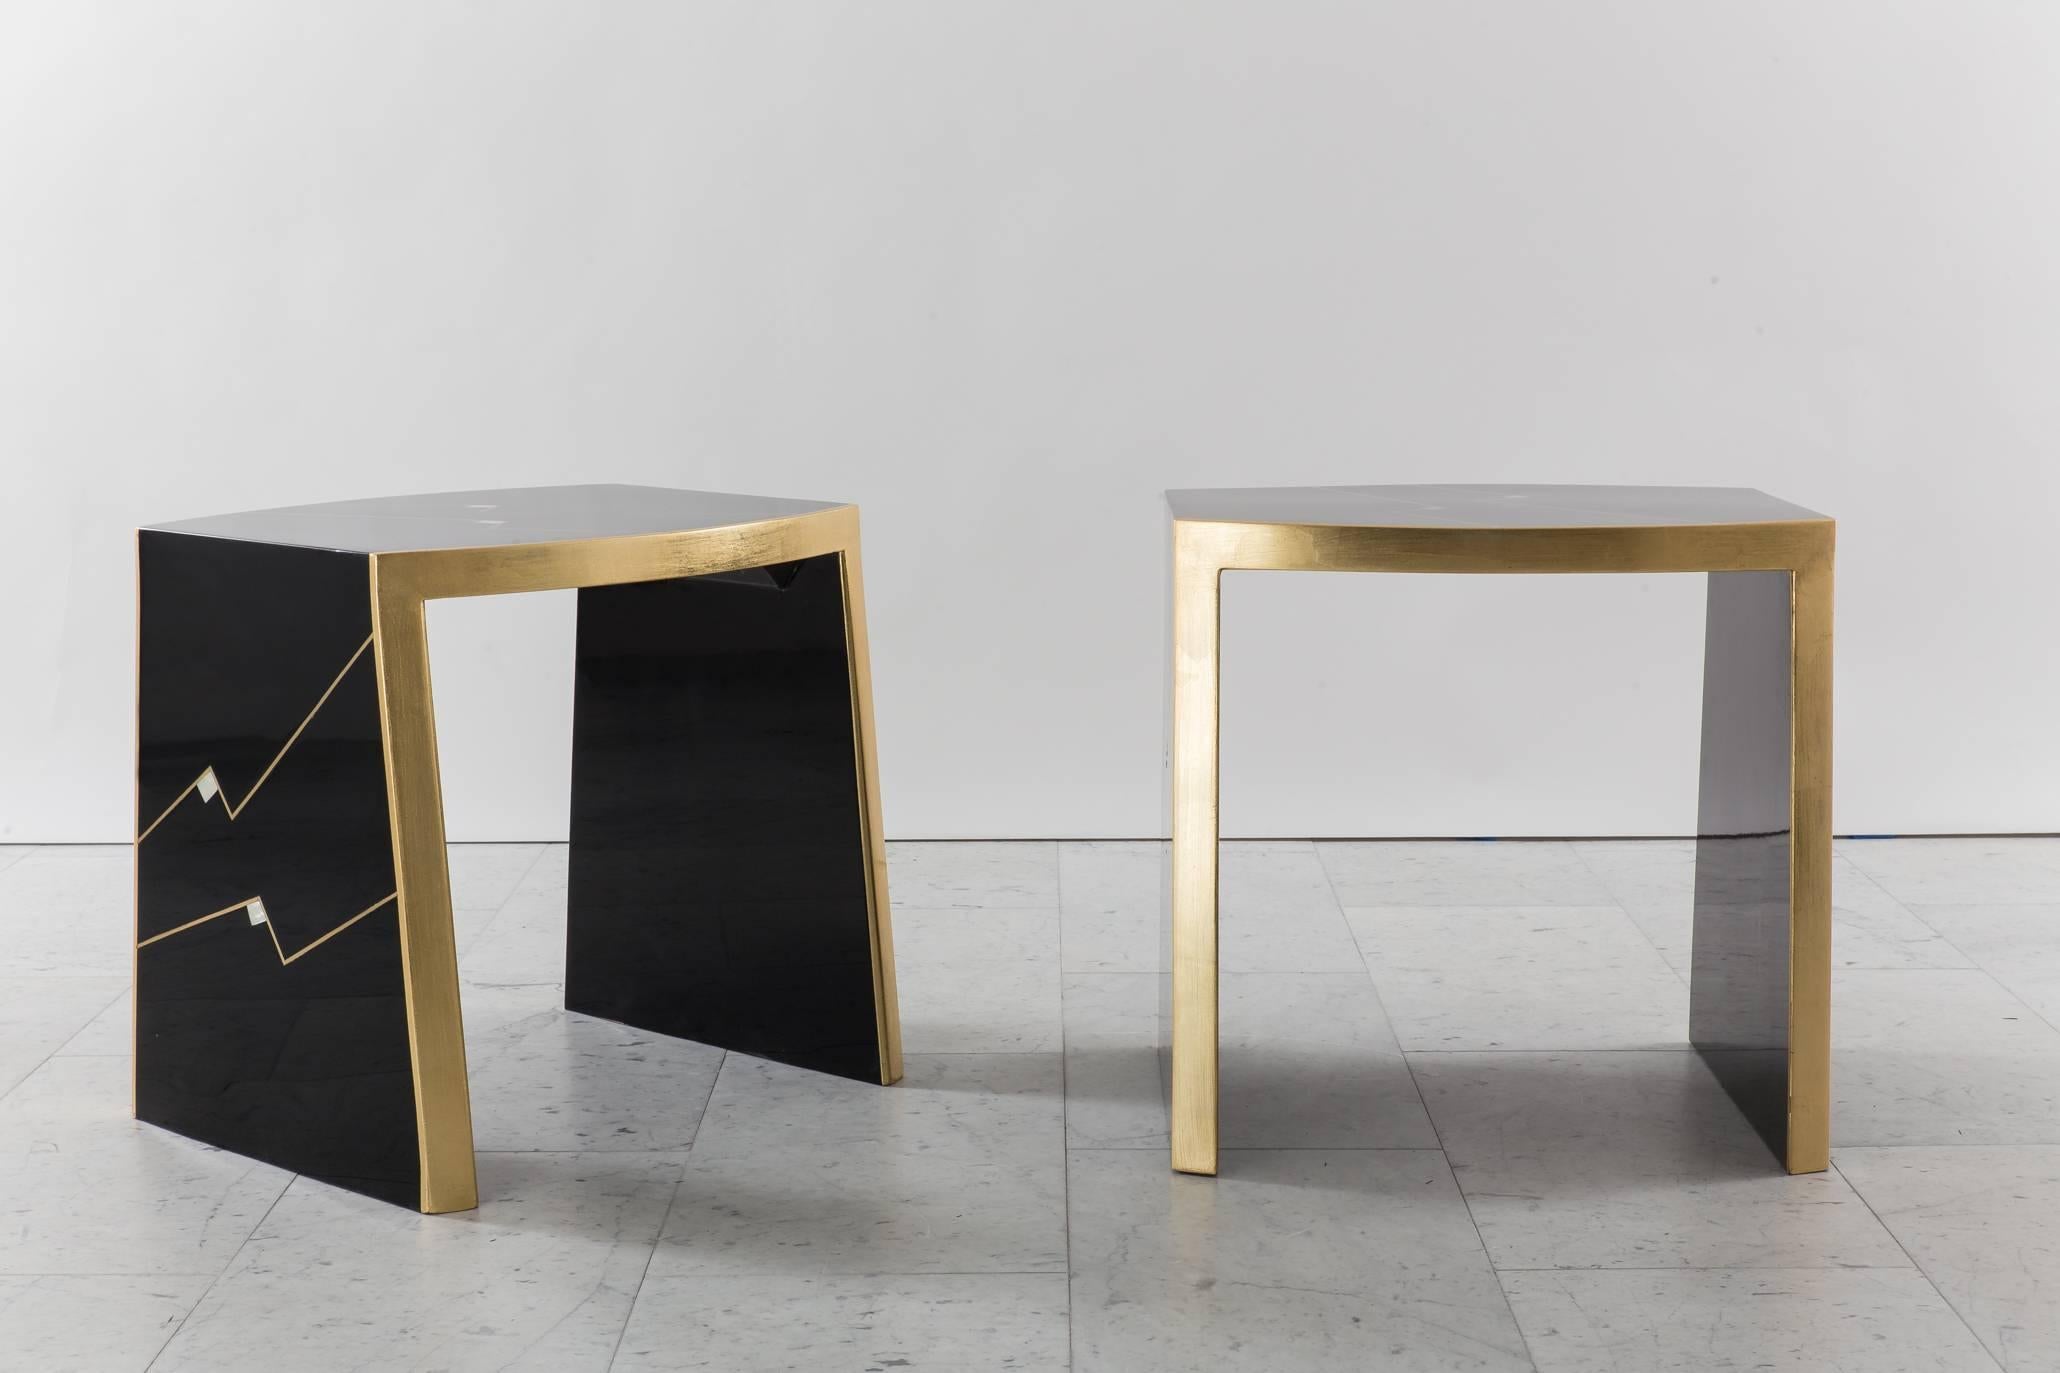 The elegant shape of Ron Seff’s iconic “Ritz” table meets the artist’s masterful execution of luxe materials and inlay. Evocative of the era in which they were made, the glamorous pair is energized by a zigzag design across a black lacquered